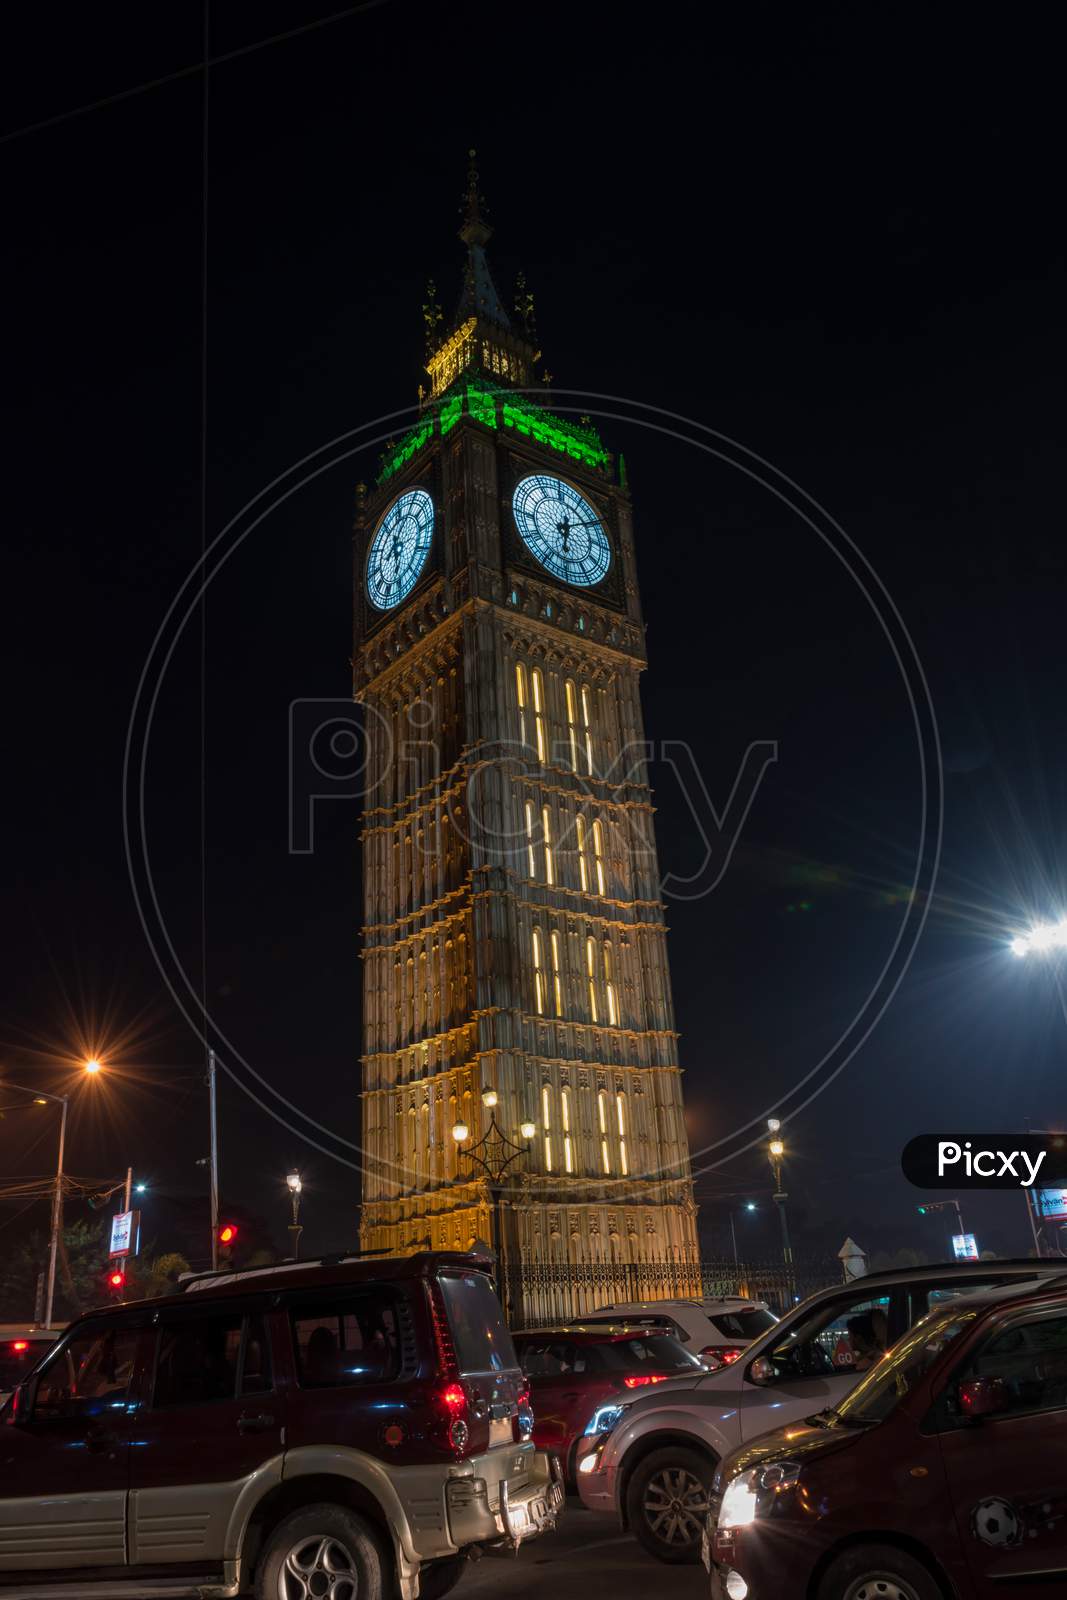 Big Watch Or Clock Tower Partial Display As Clone Model Of Big Ben Watch Tower Of London, On Public Street At Lake Town, Kolkata, India For Public.